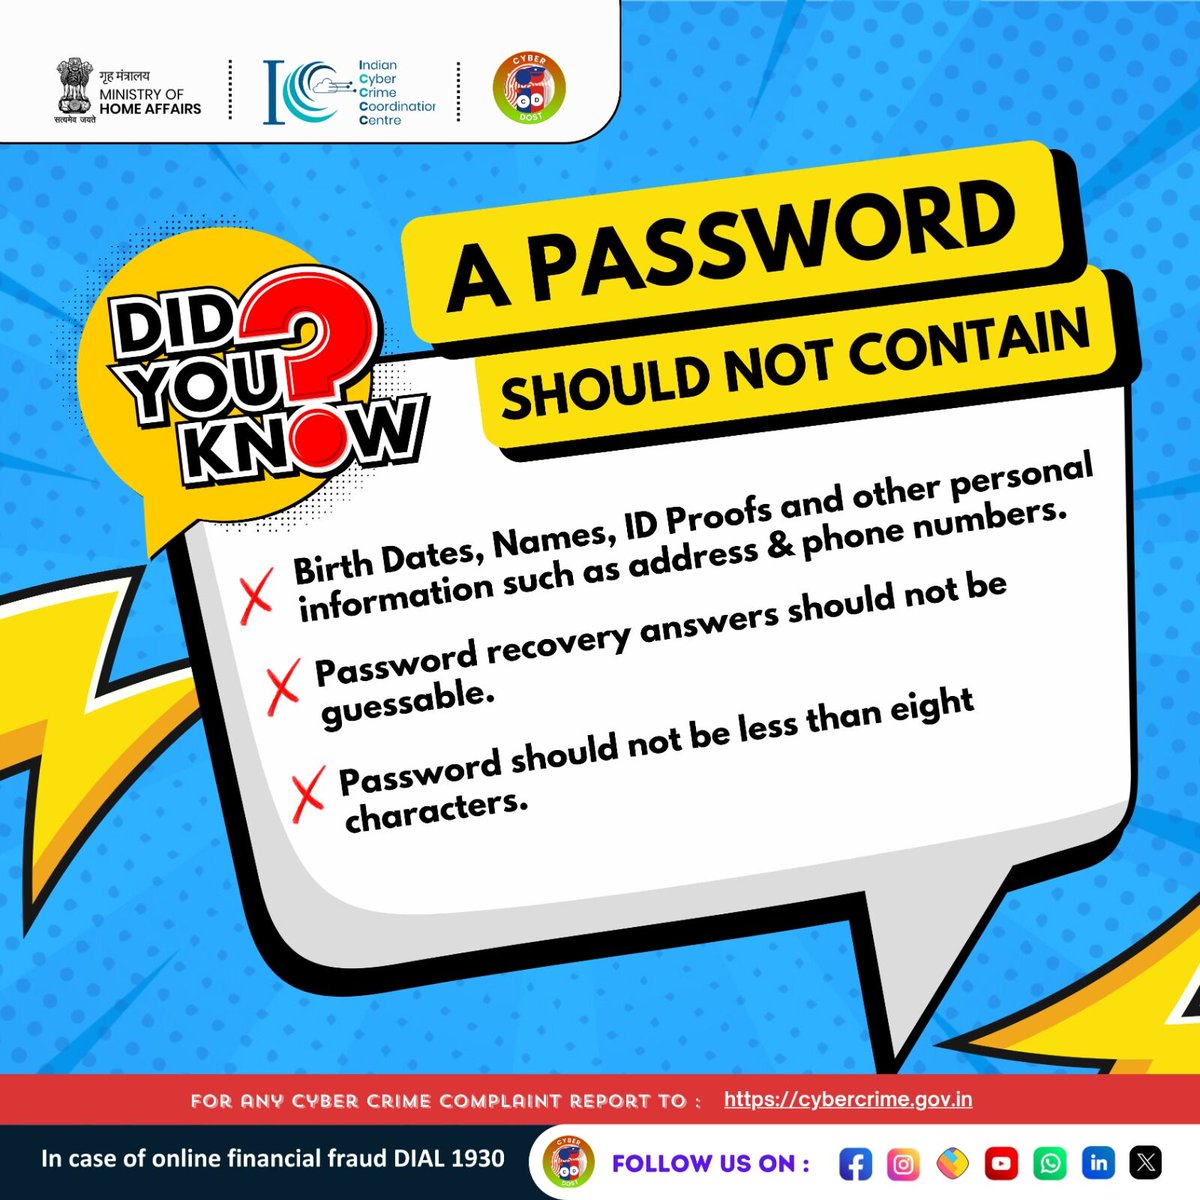 Secure Your Digital World. Remember, a strong password is your first line of defense against cyberattacks. Stay safe online!
#I4C #MHA #Cyberdost #Cybersecurity #CyberSafeIndia #CyberSafeTips #CyberSecurityAwareness #Stayalert #fraud #newsfeed